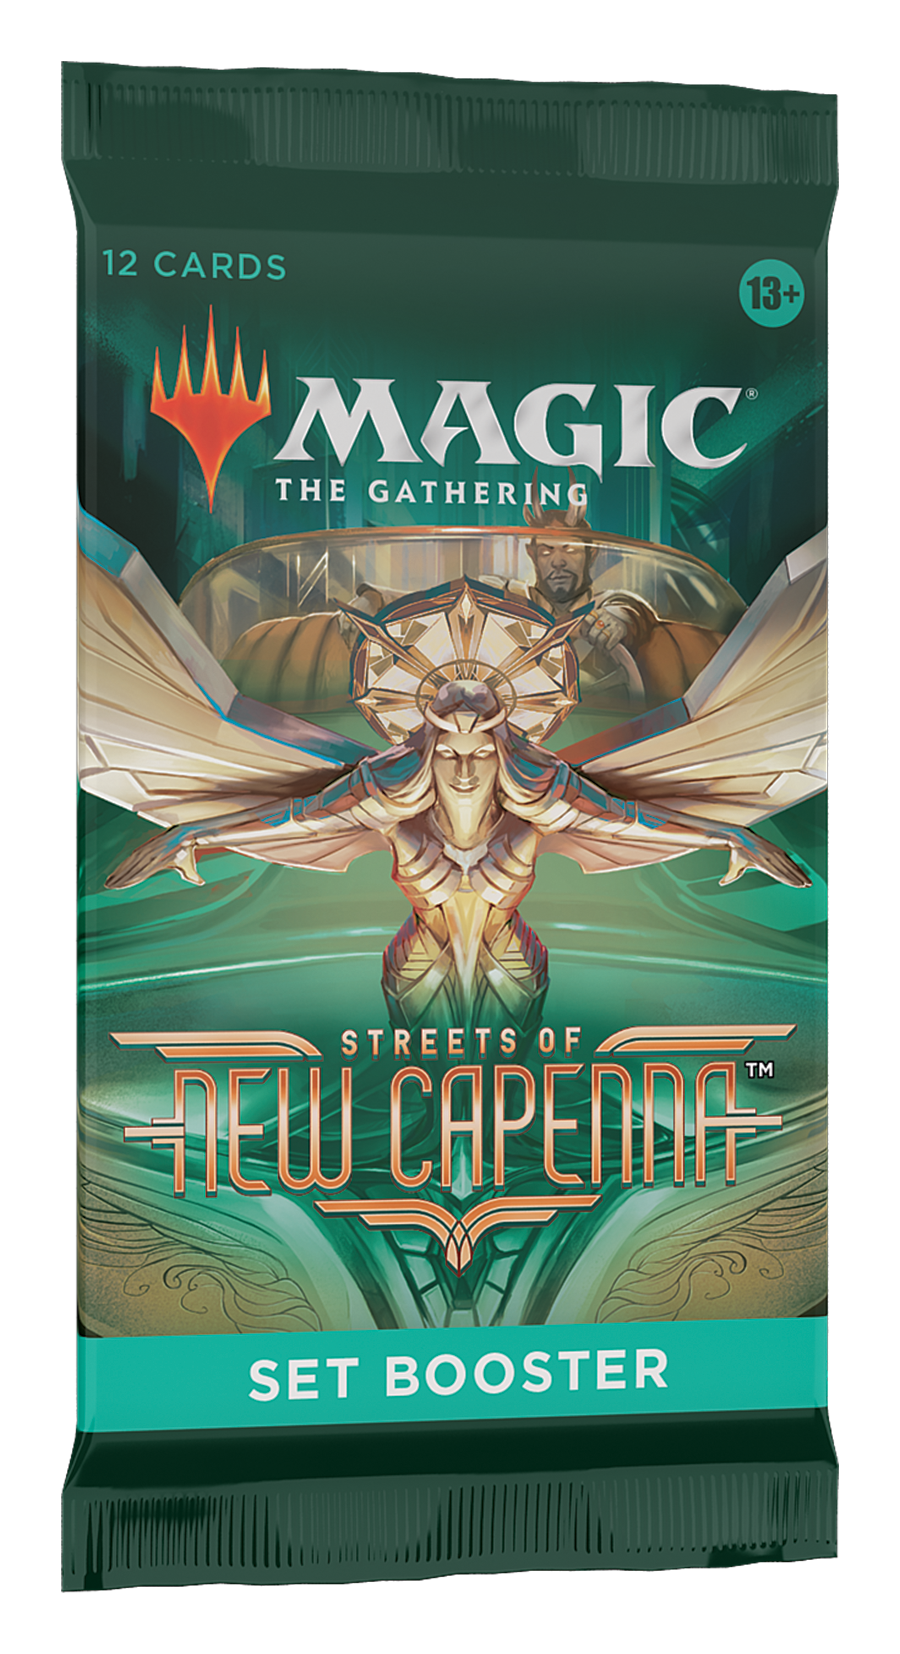 Magic: the Gathering - Streets of New Capenna Set Booster Pack